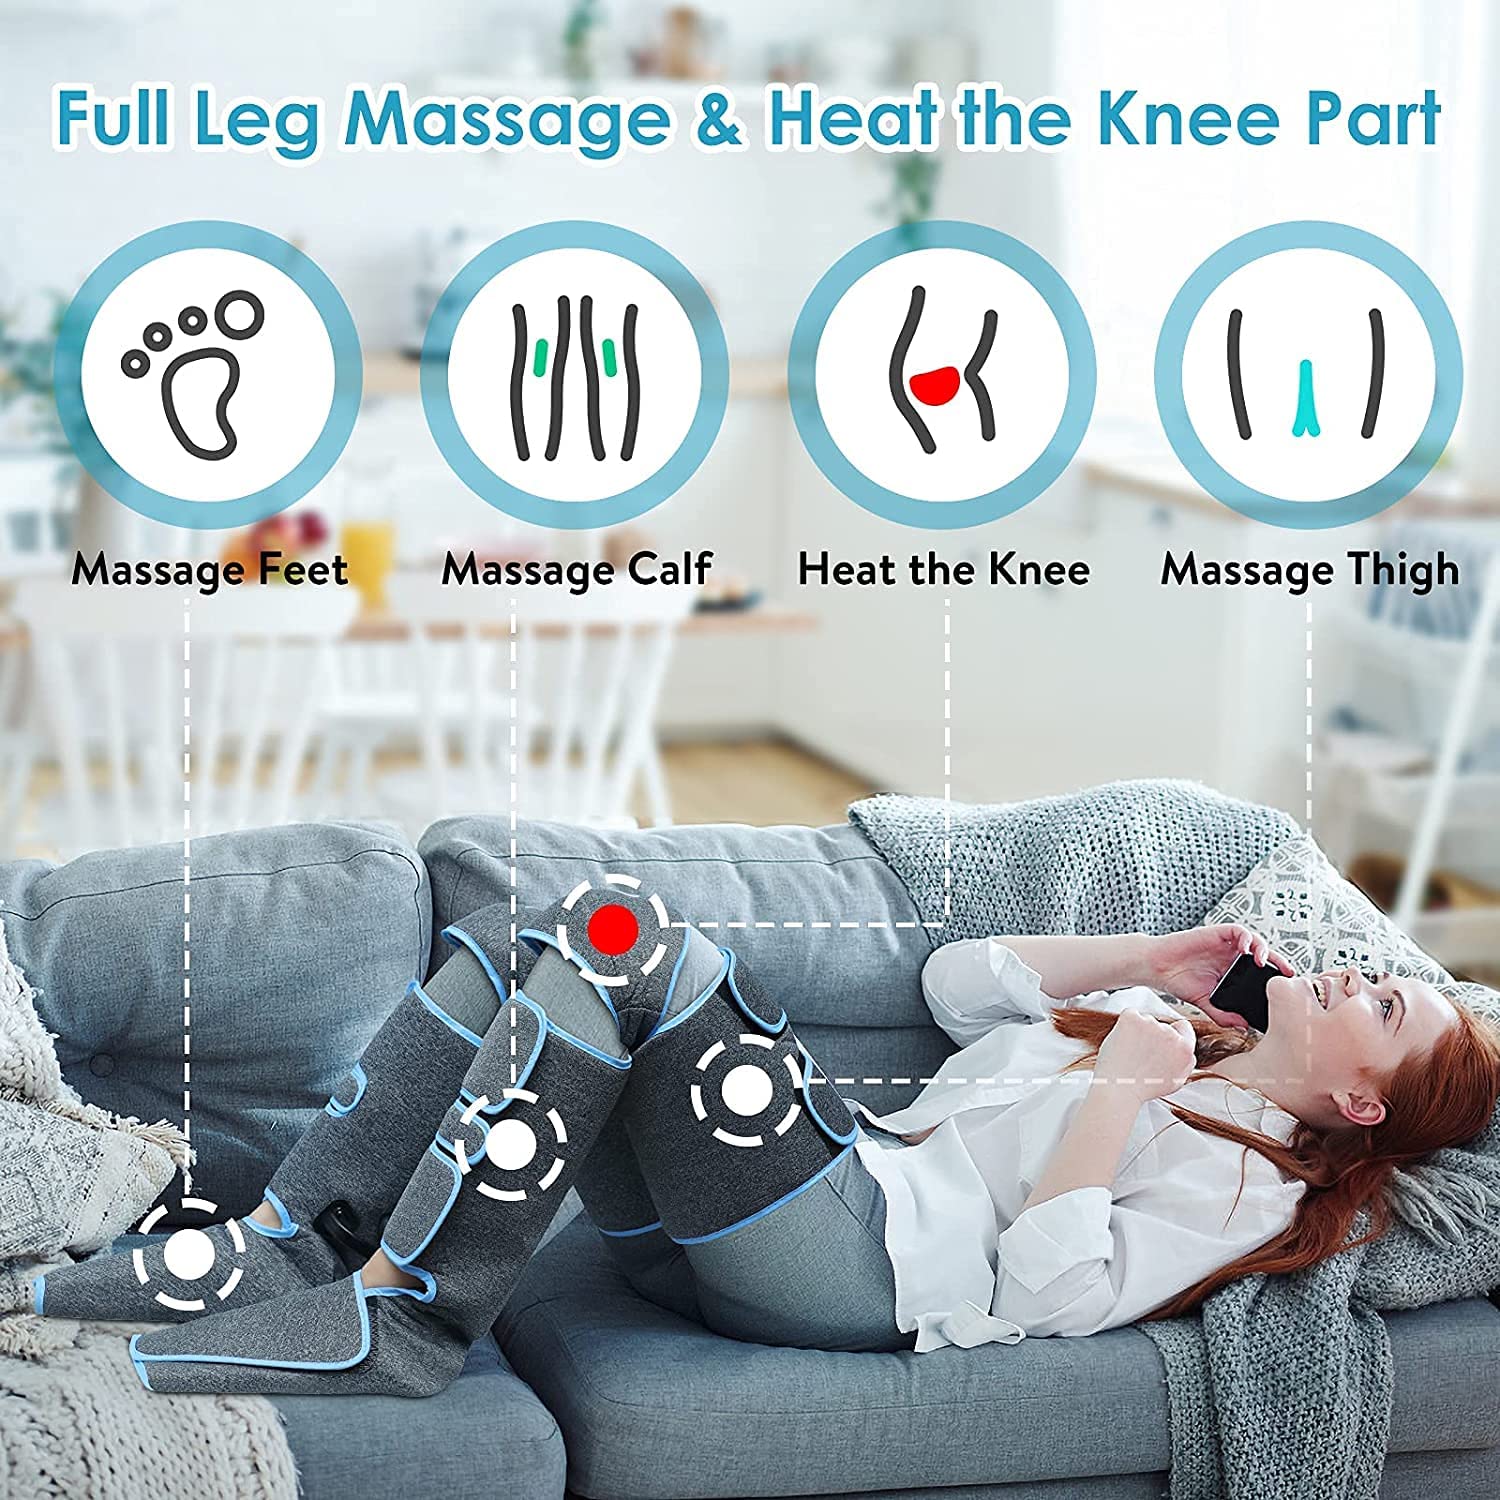 360° Professional Foot And Leg Pain Reliever & Massager with Knee Heaters